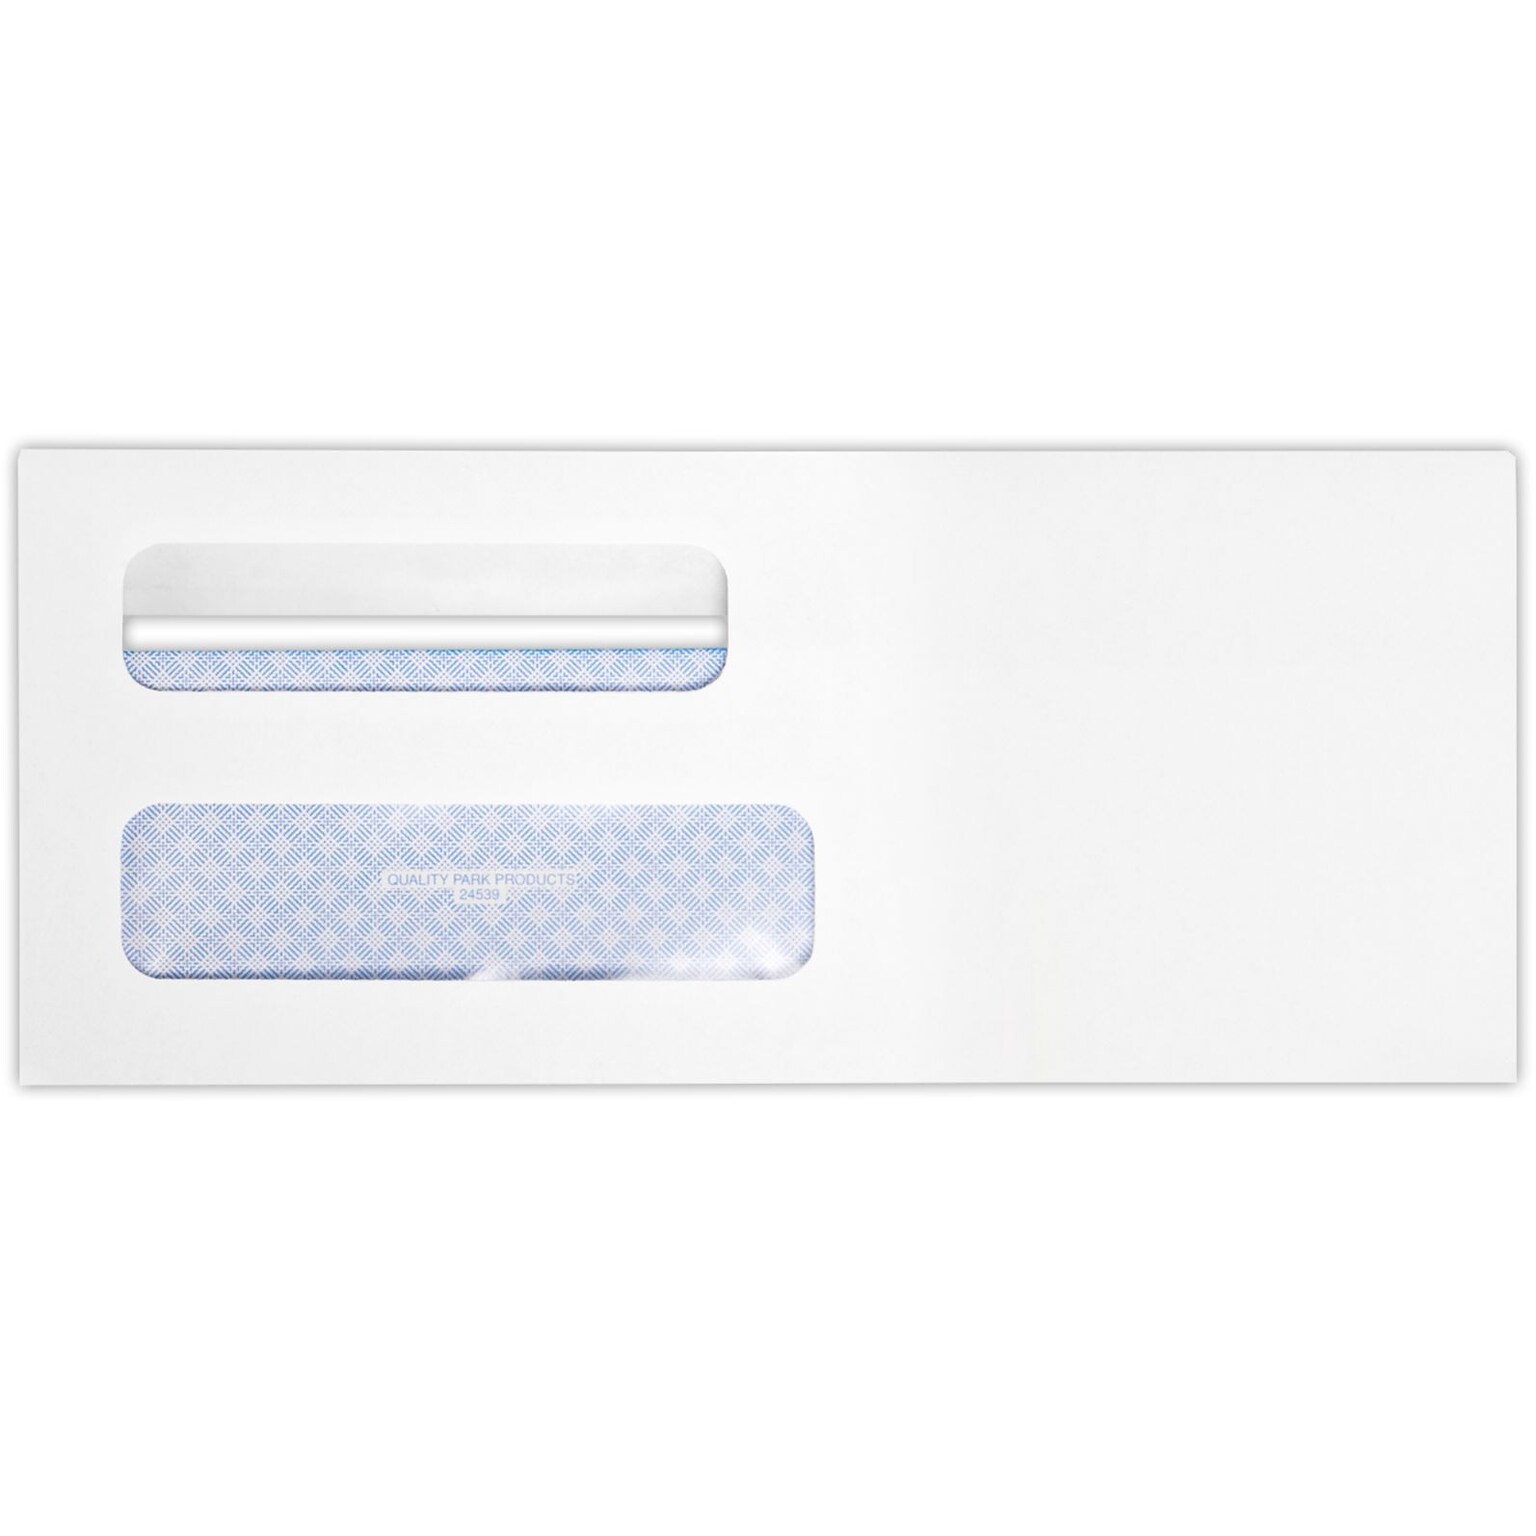 Quality Park Redi-Seal Self Seal Security Tinted #8 Double Window Envelope, 3 5/8 x 8 5/8, White Wove, 1000/Pack (24539-1000)